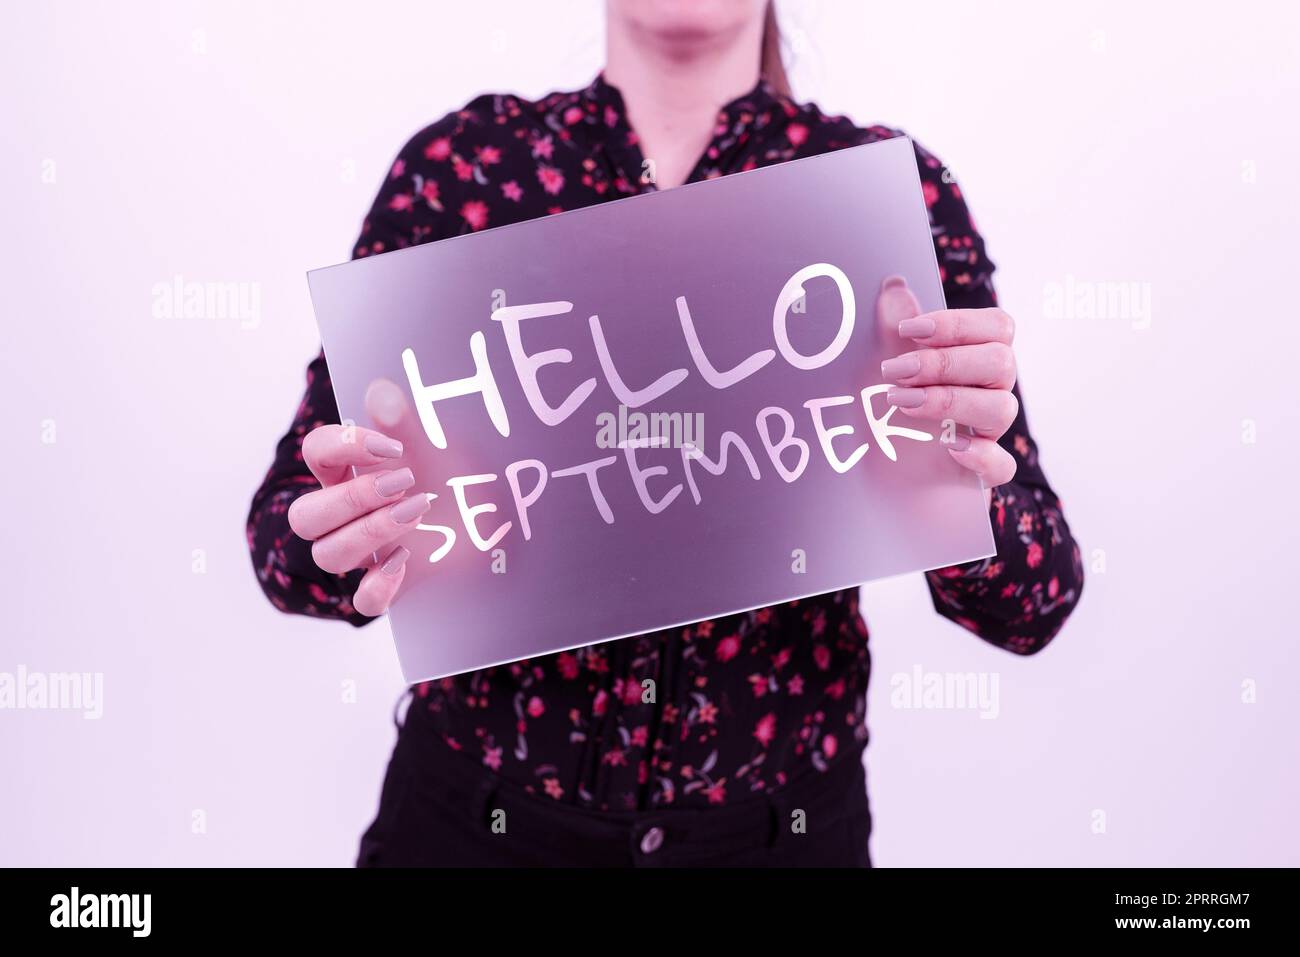 Sign displaying Hello SeptemberEagerly wanting a warm welcome to the month of September. Business idea Eagerly wanting a warm welcome to the month of September Stock Photo